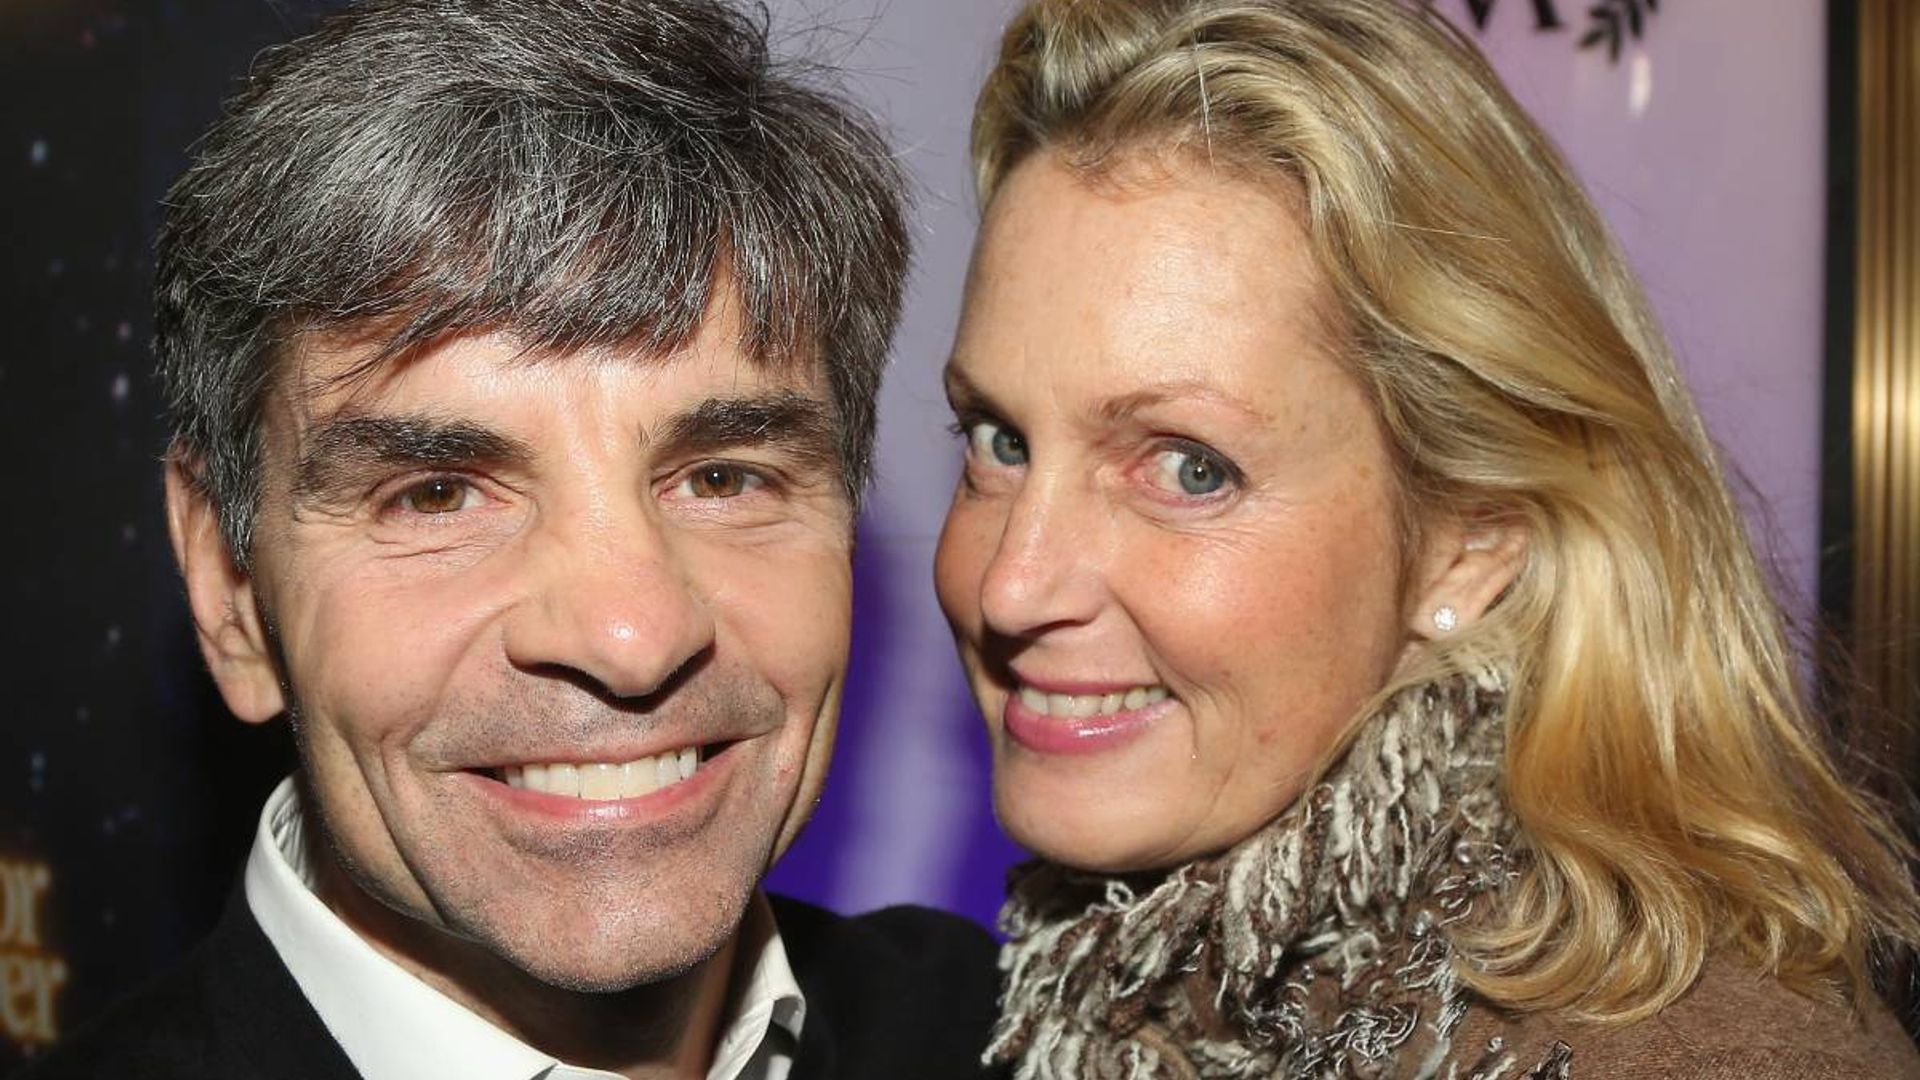 George Stephanopoulos and Ali Wentworth's unique relationship story is like something from a movie